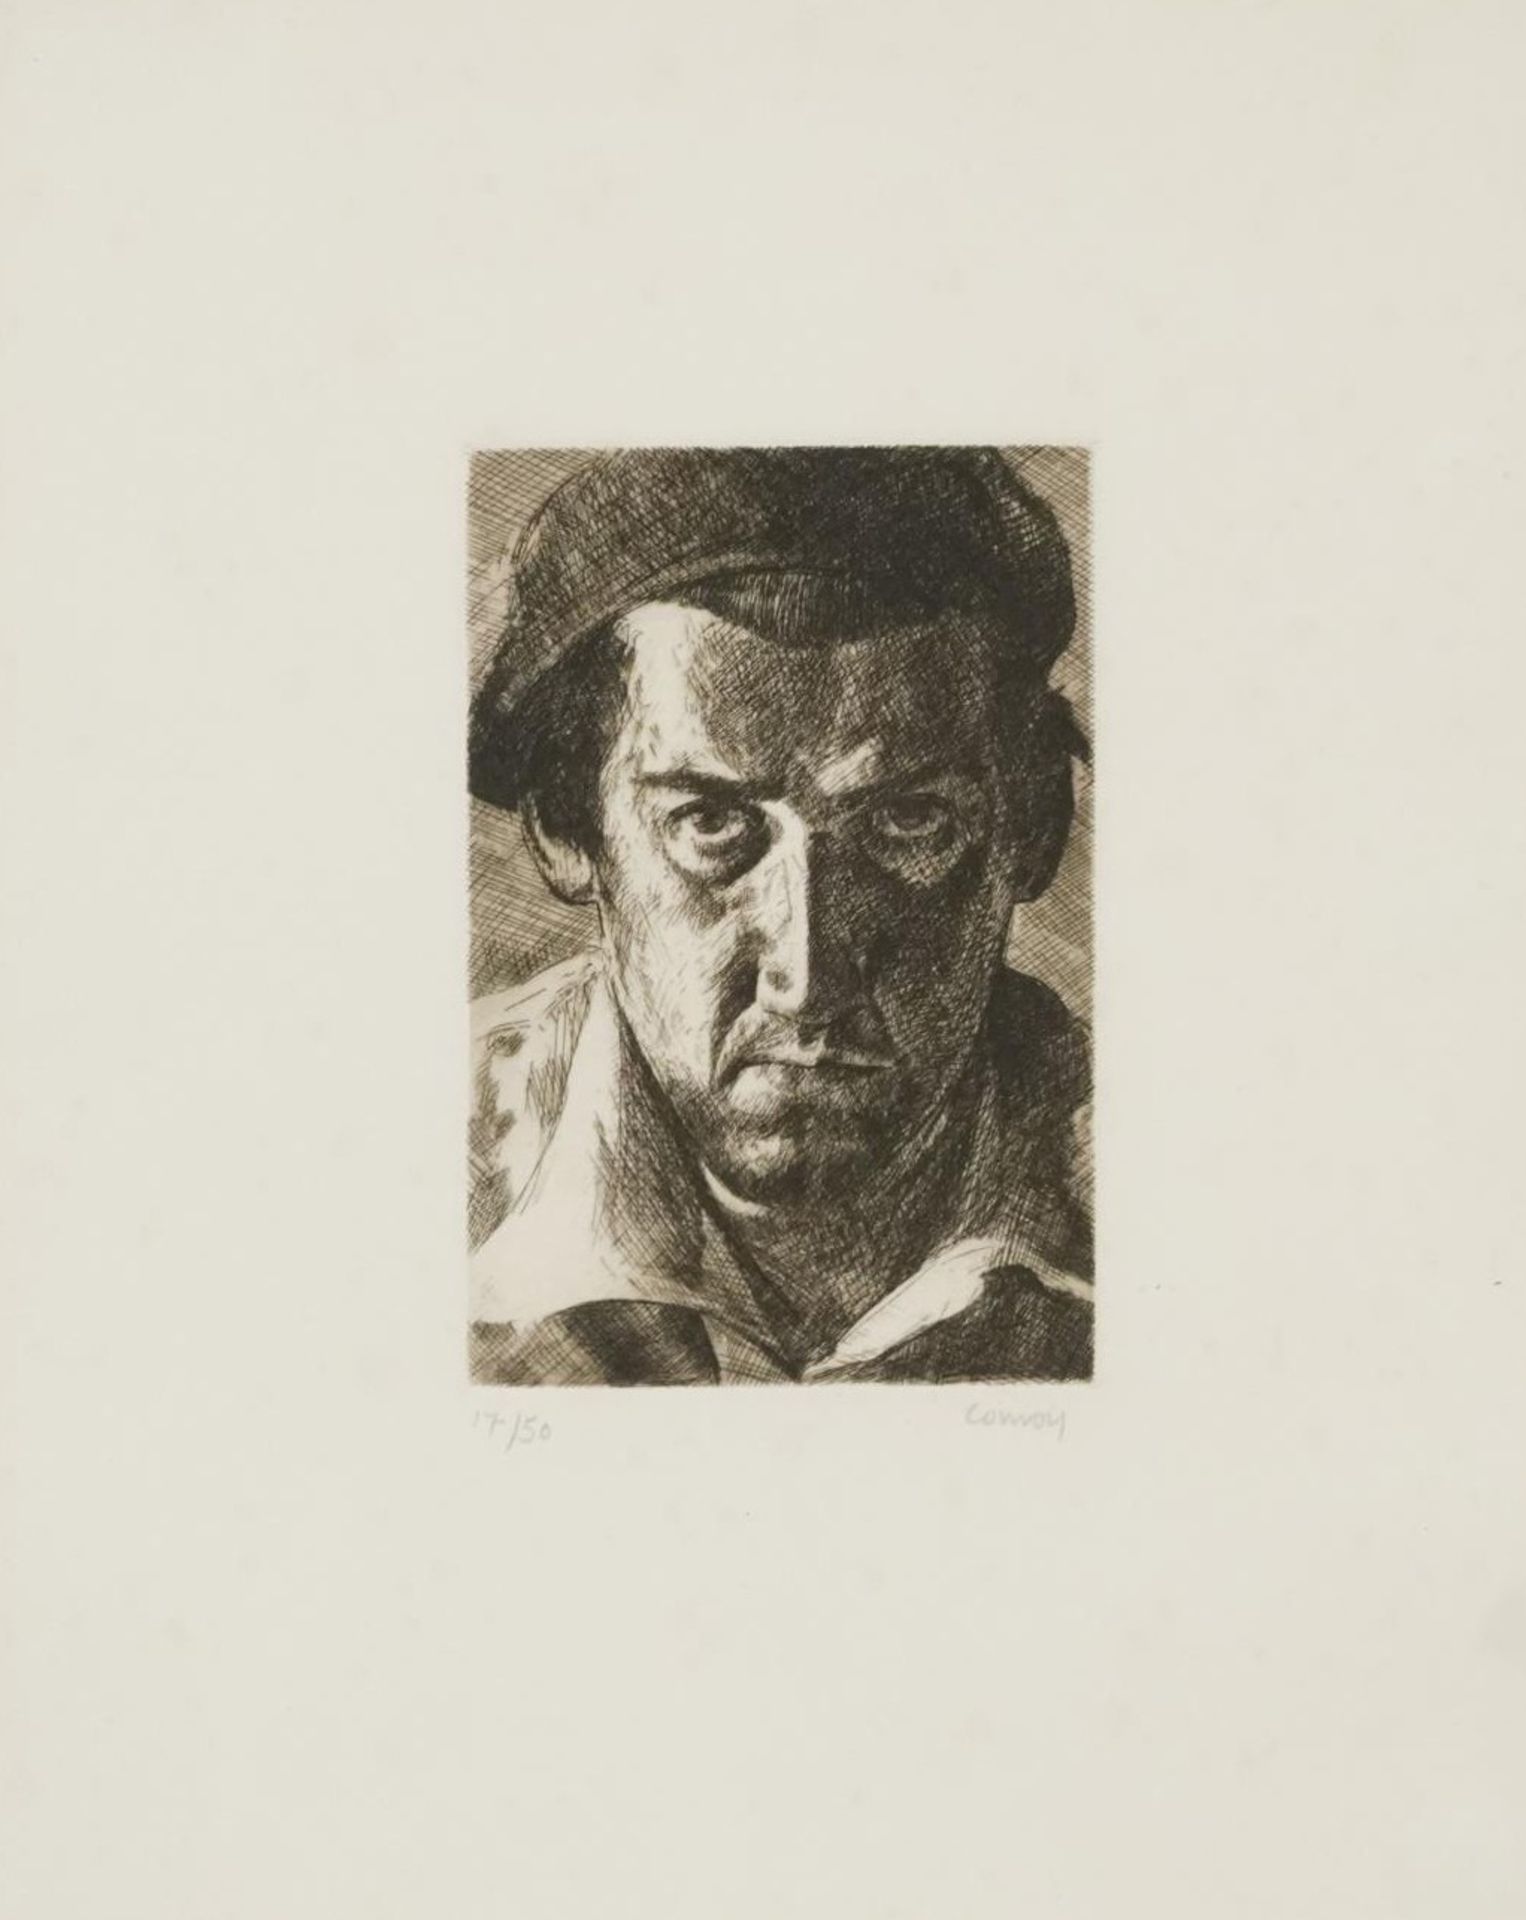 Stephen Conroy - Portrait of a man, Scottish school pencil signed black and white etching, limited